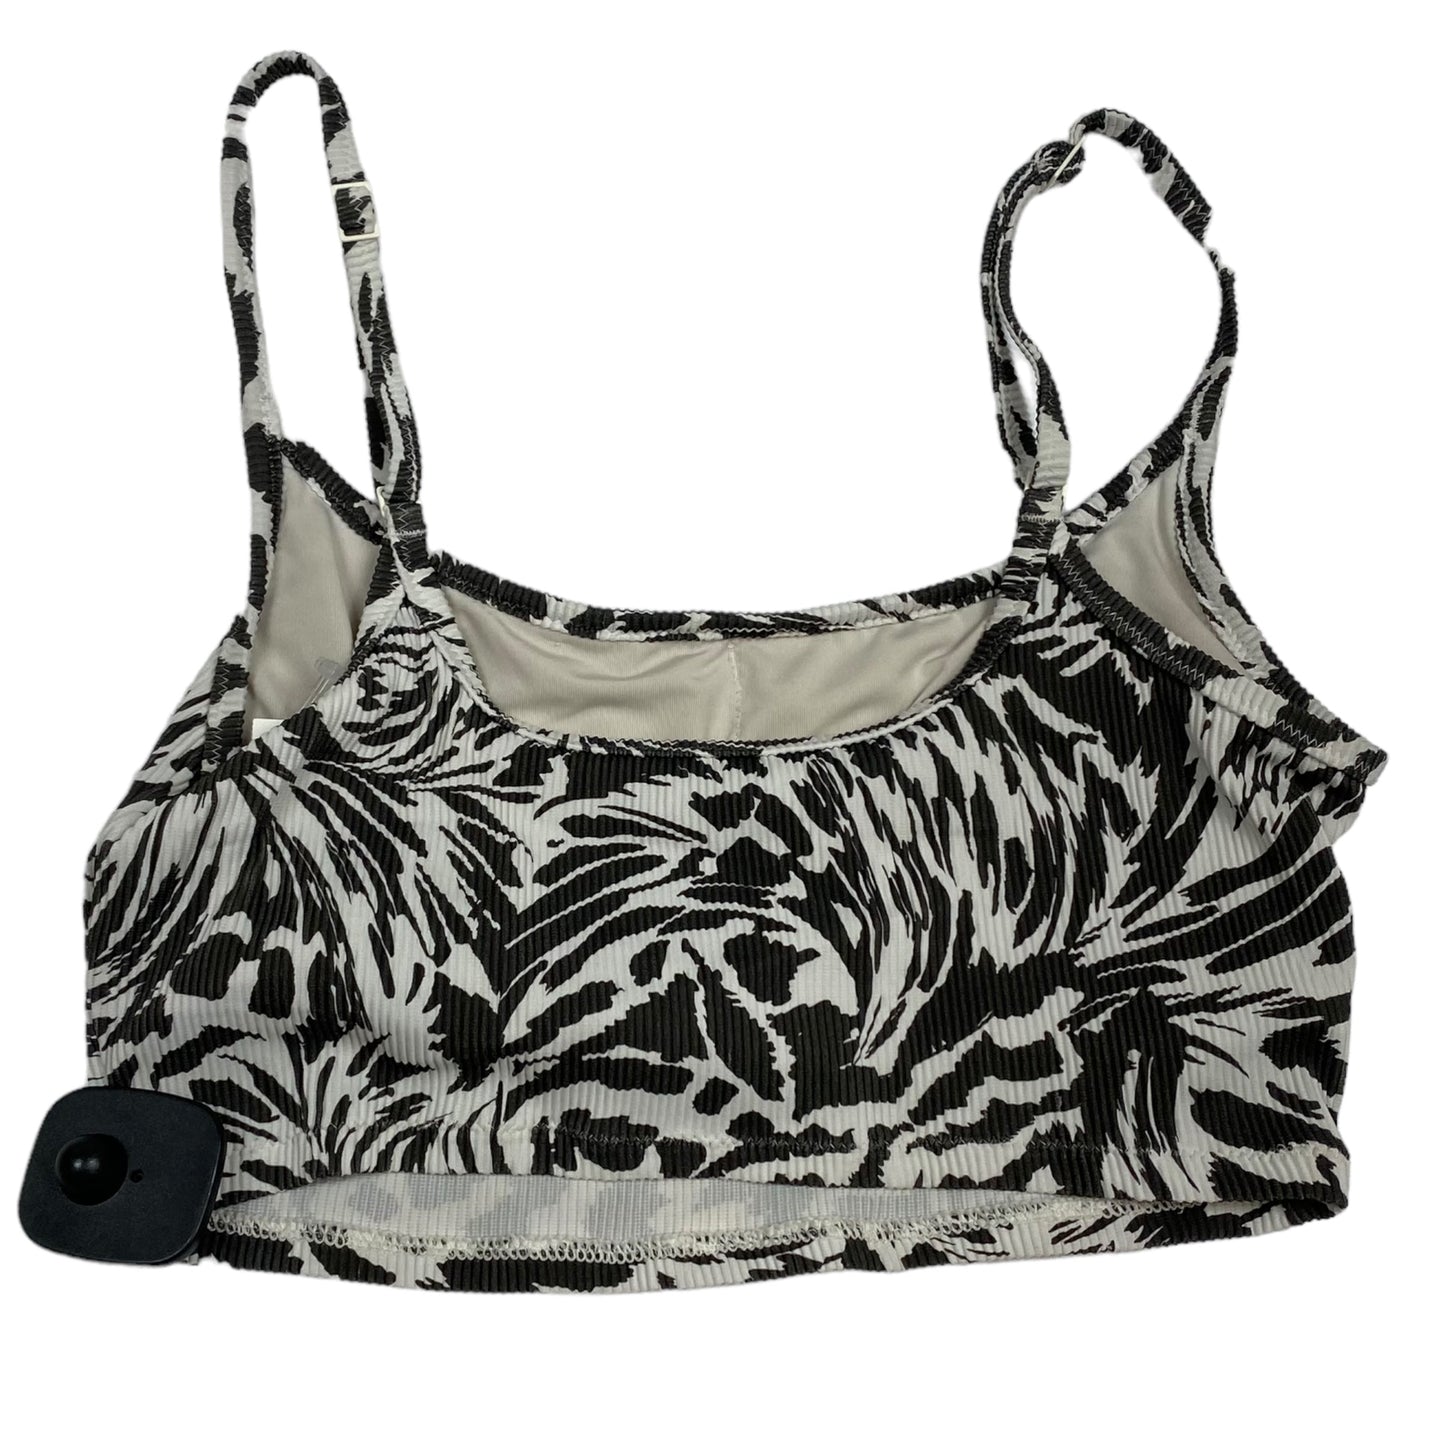 Athletic Bra By Aerie  Size: S